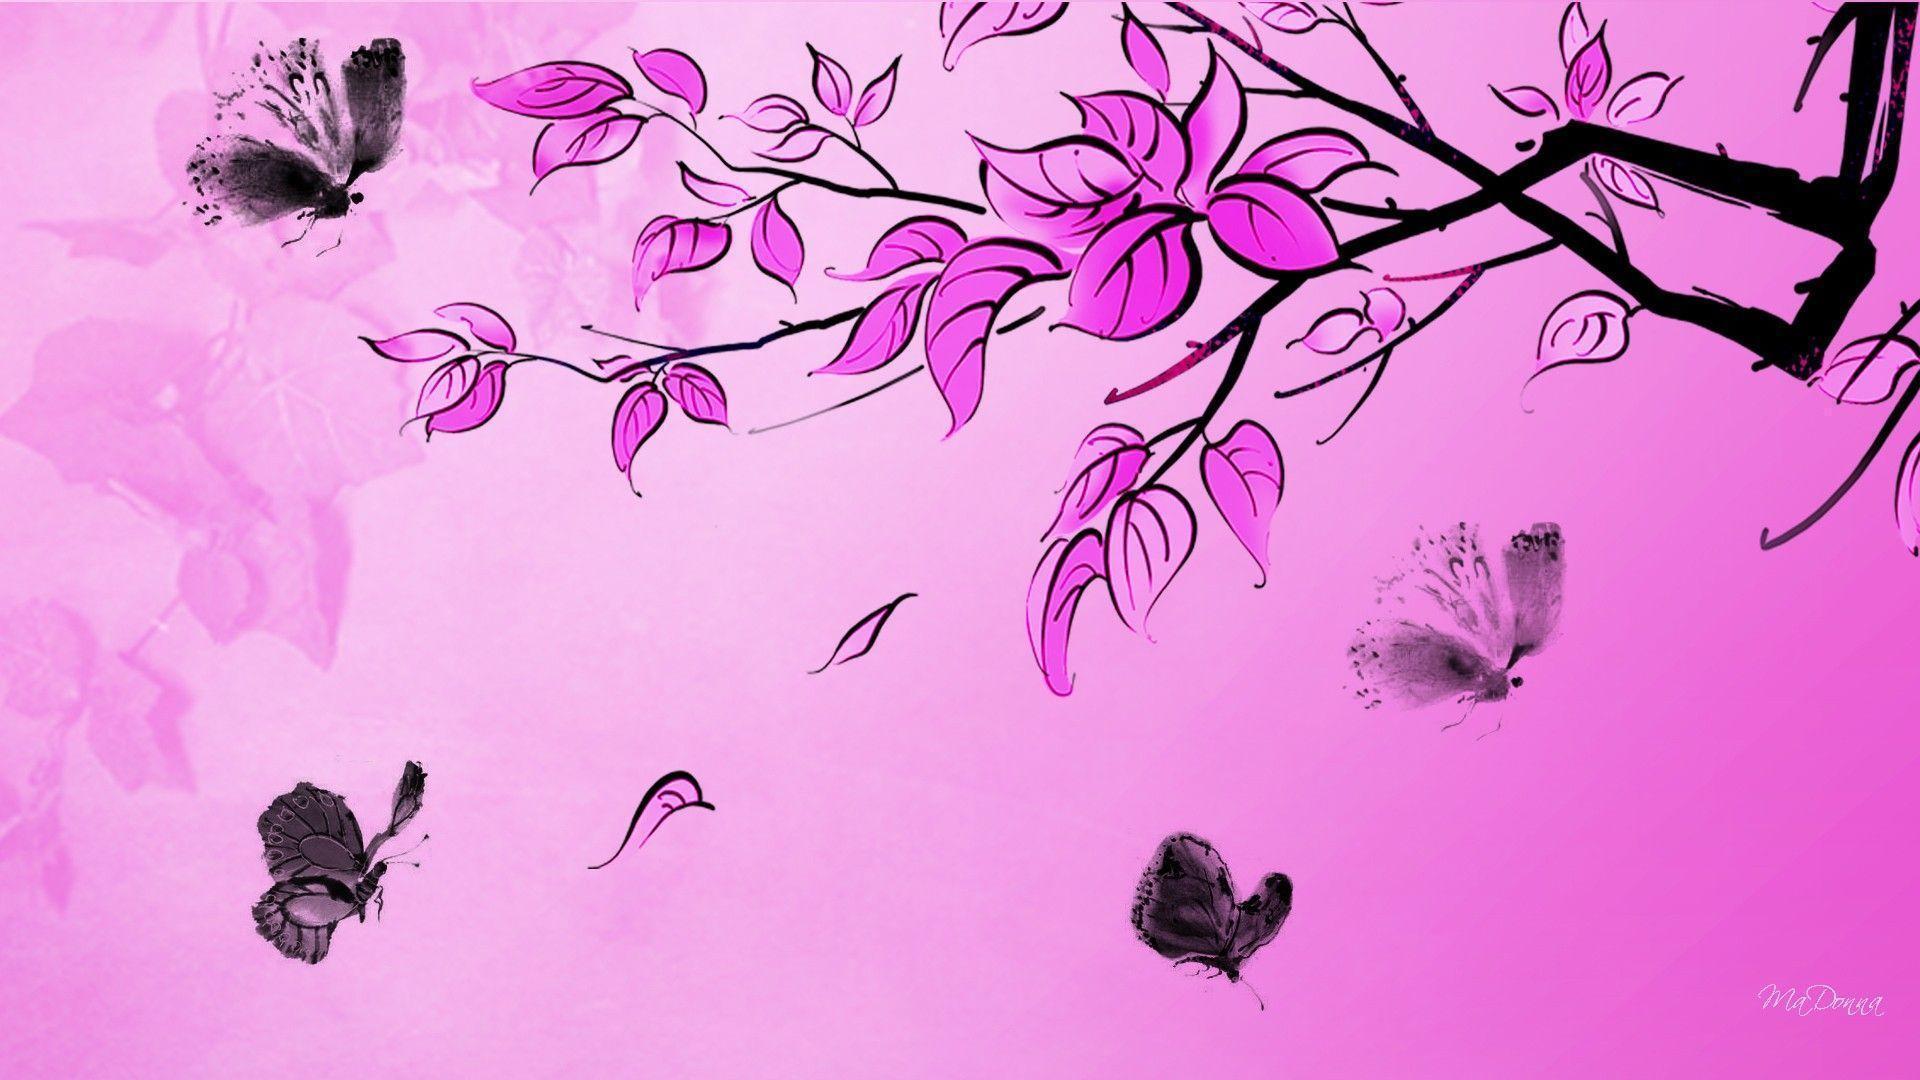 Wallpaper For > Hot Pink And Black Butterfly Wallpaper